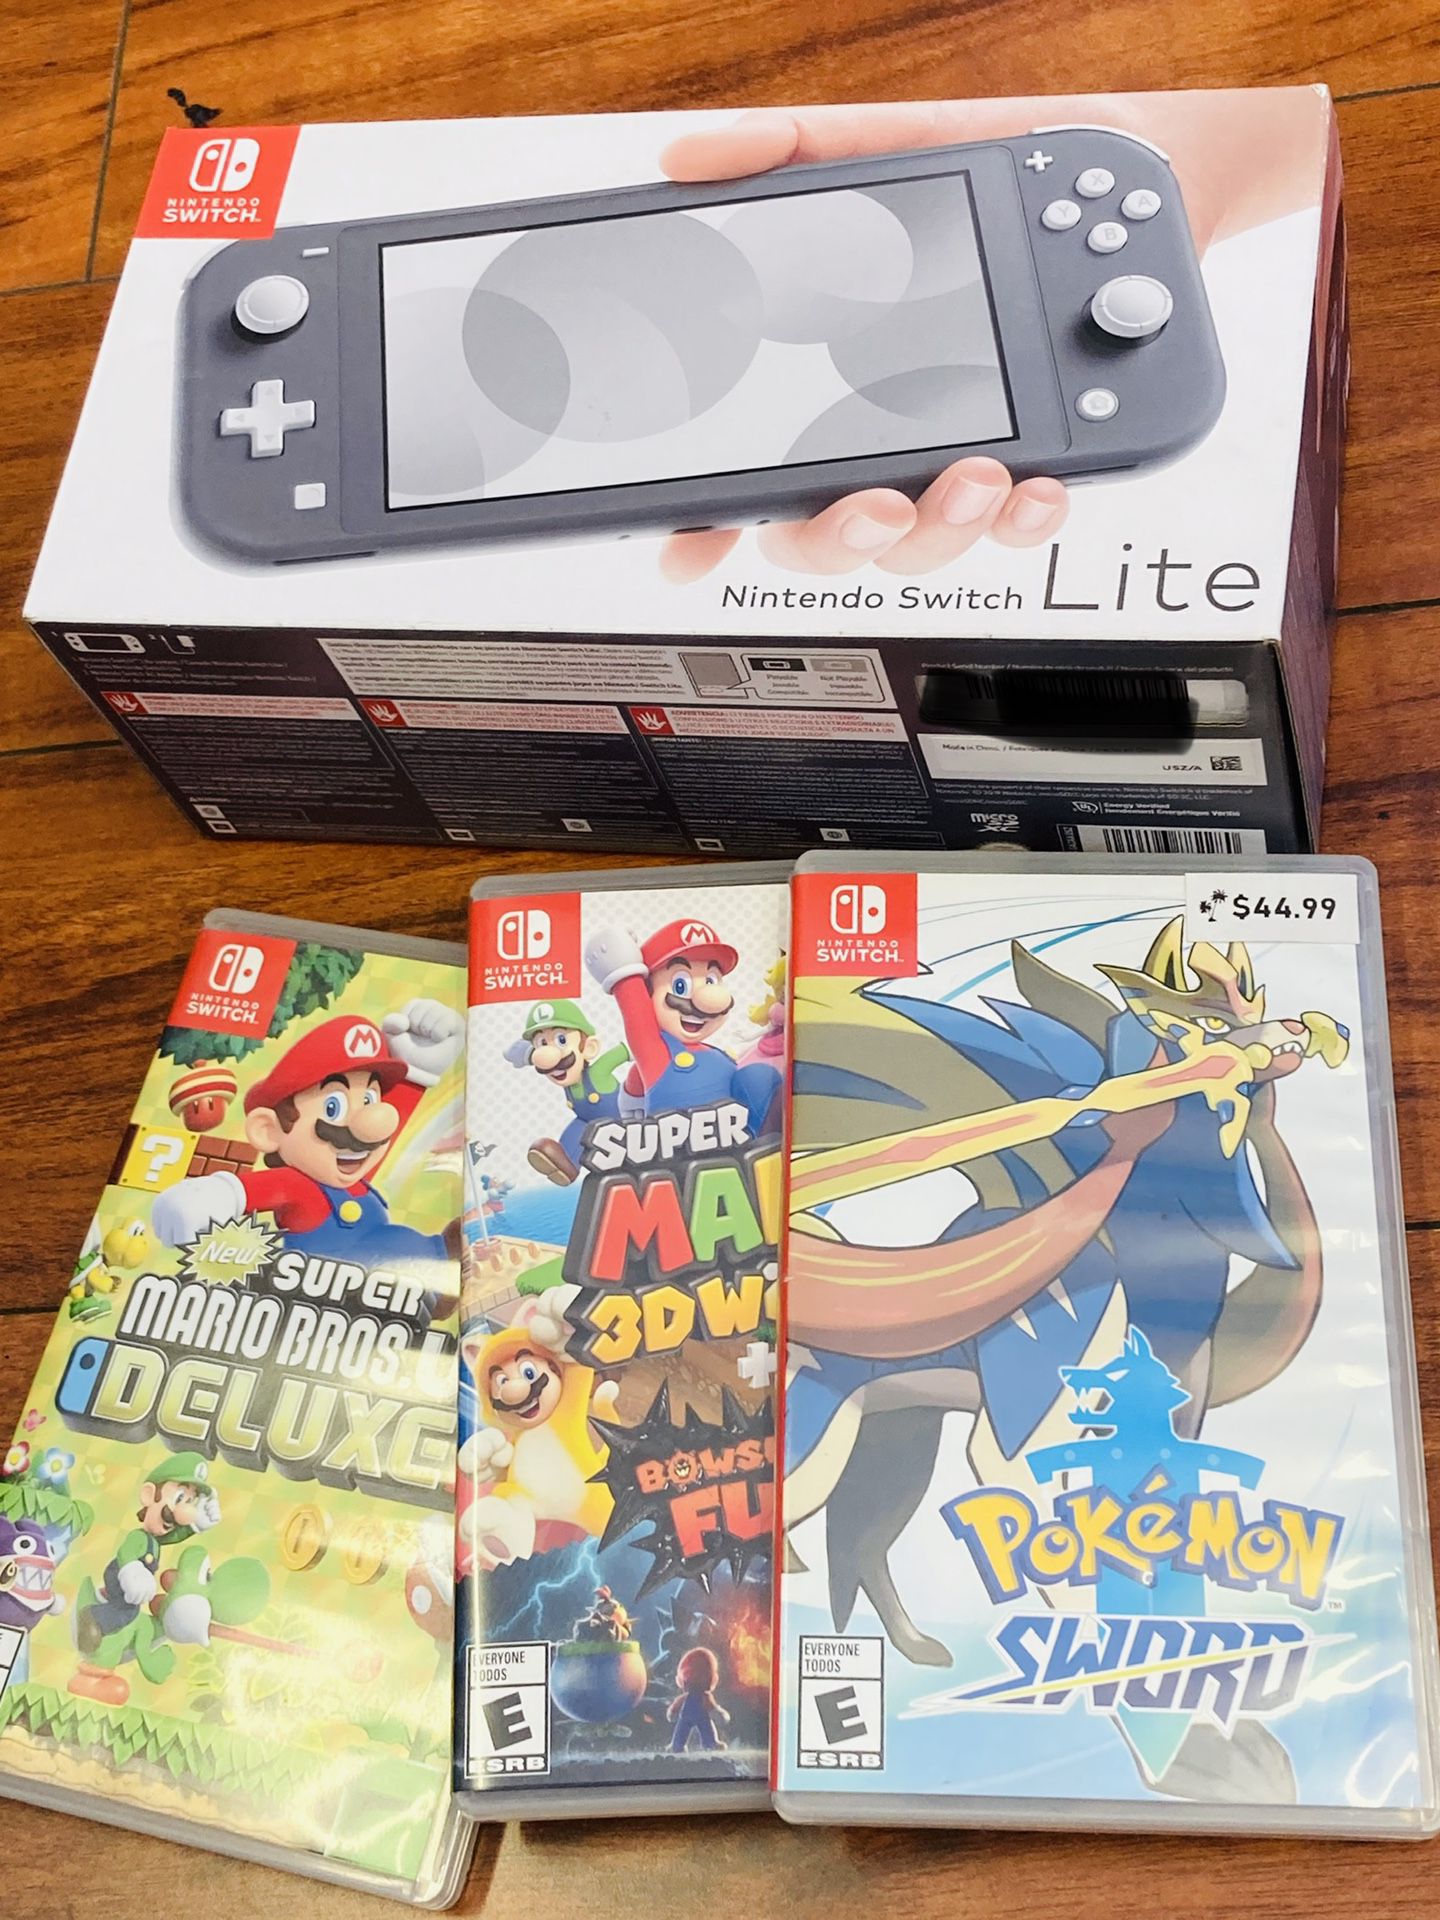 Brand New - Nintendo Switch LITE - Gray - 3 Games Included - $300